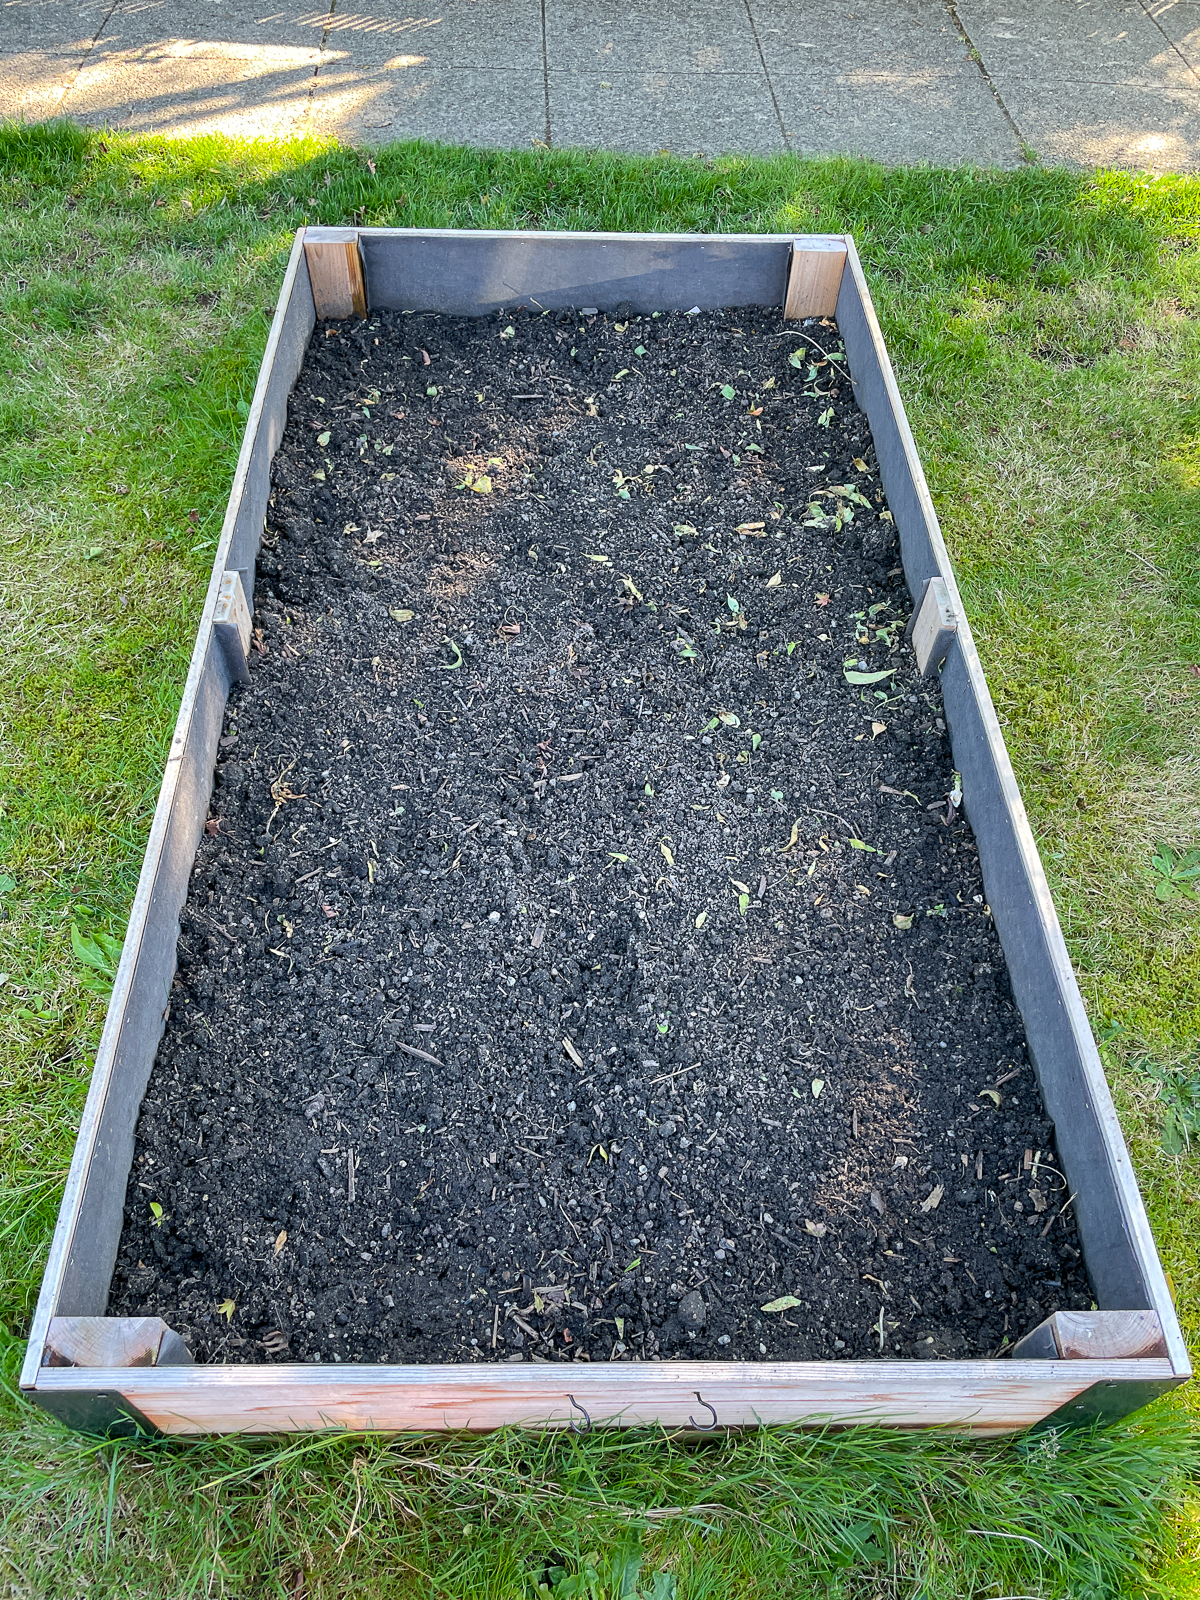 empty raised bed after plants have been pulled out